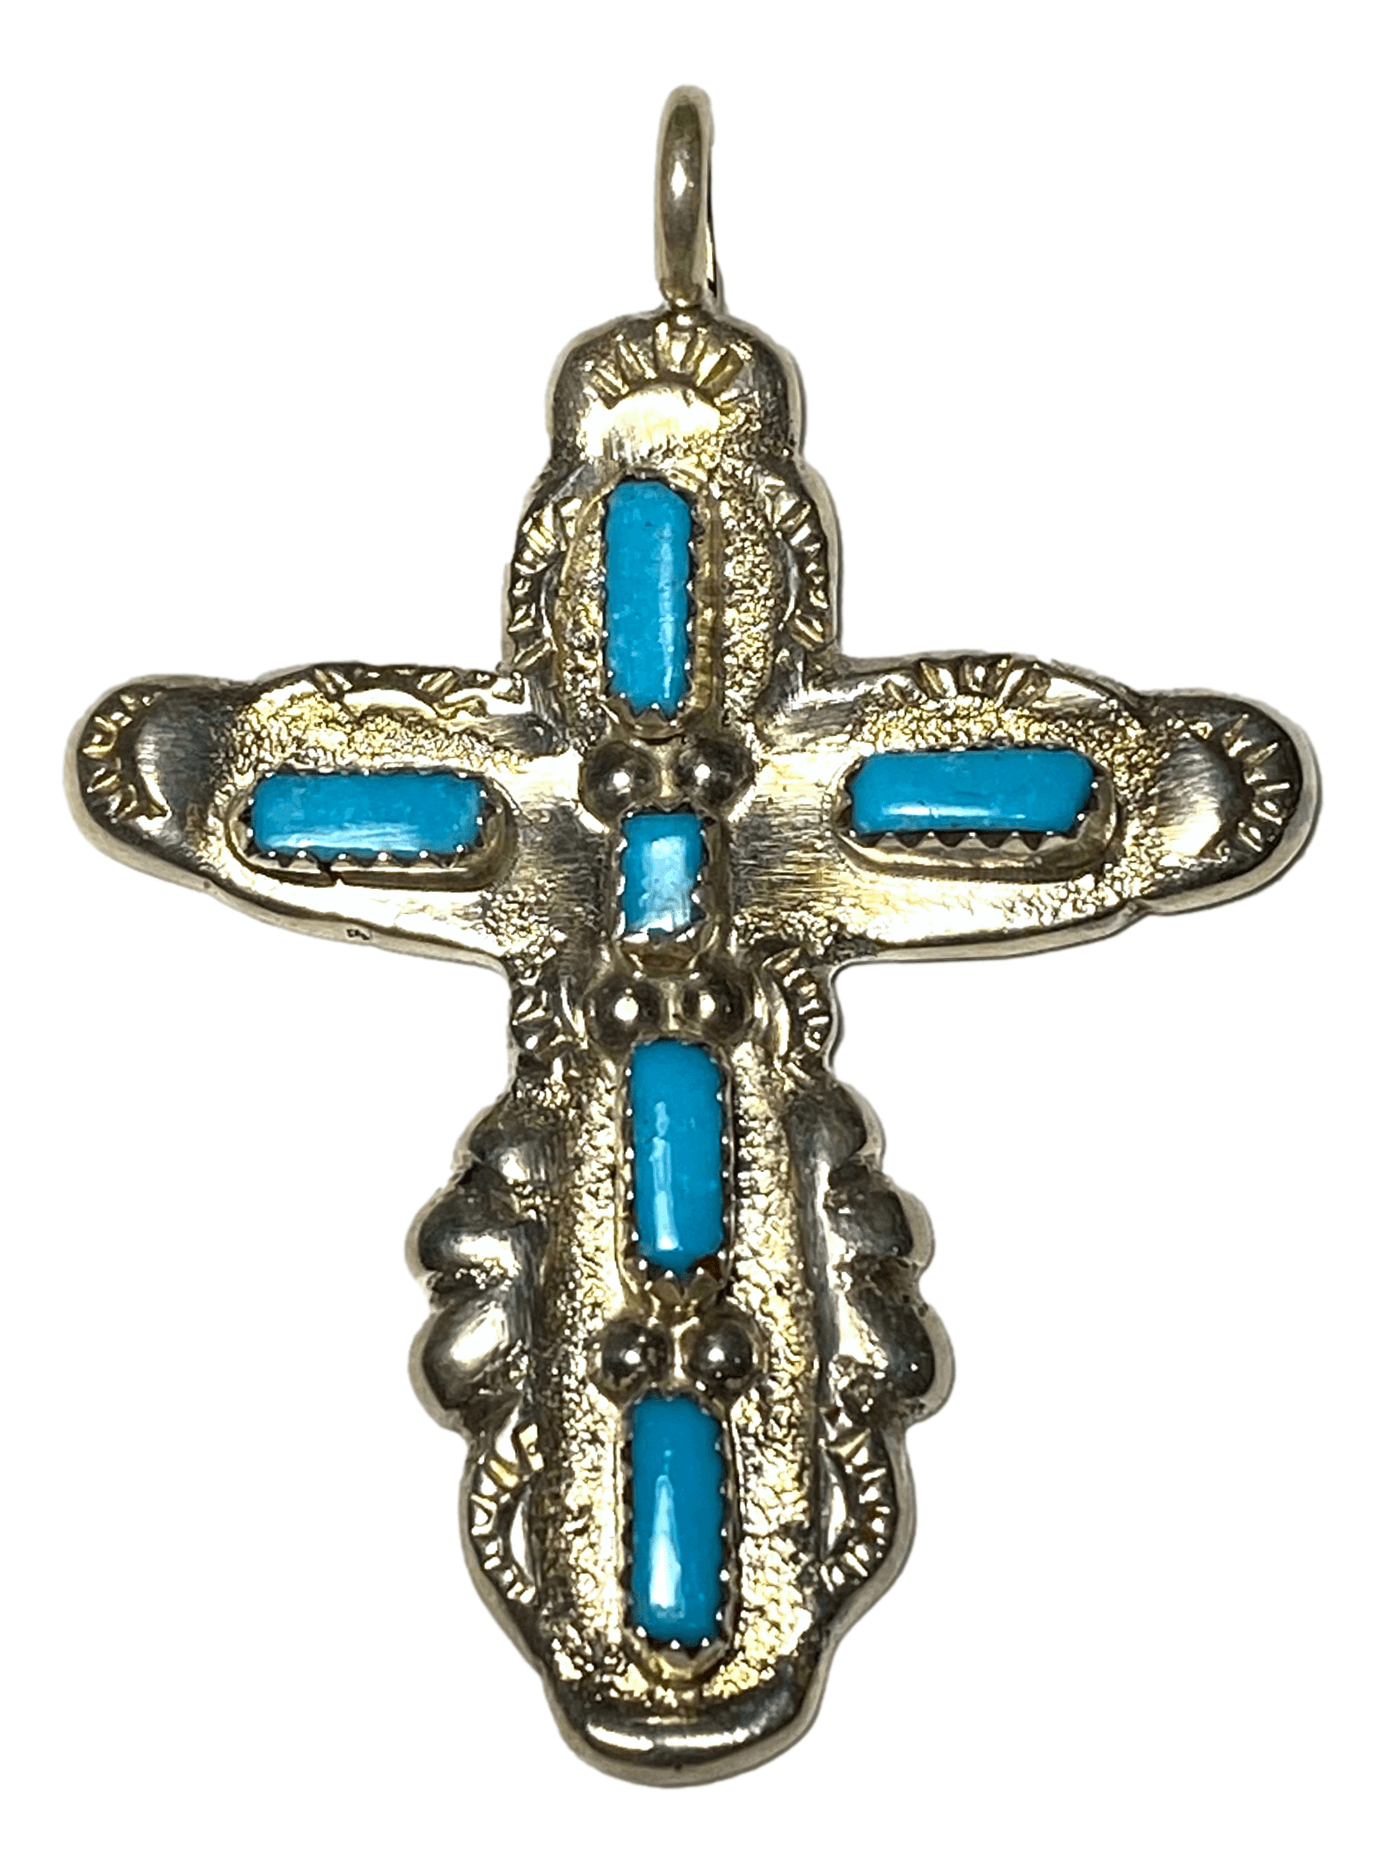 Pendant Cross Sterling Silver 6 Count Turquoise Rectangular Engraved Design Handcrafted by New Mexico Artisan 2 L x 1 1/2 W inches - Ysleta Mission Gift Shop- VOTED El Paso's Best Gift Shop